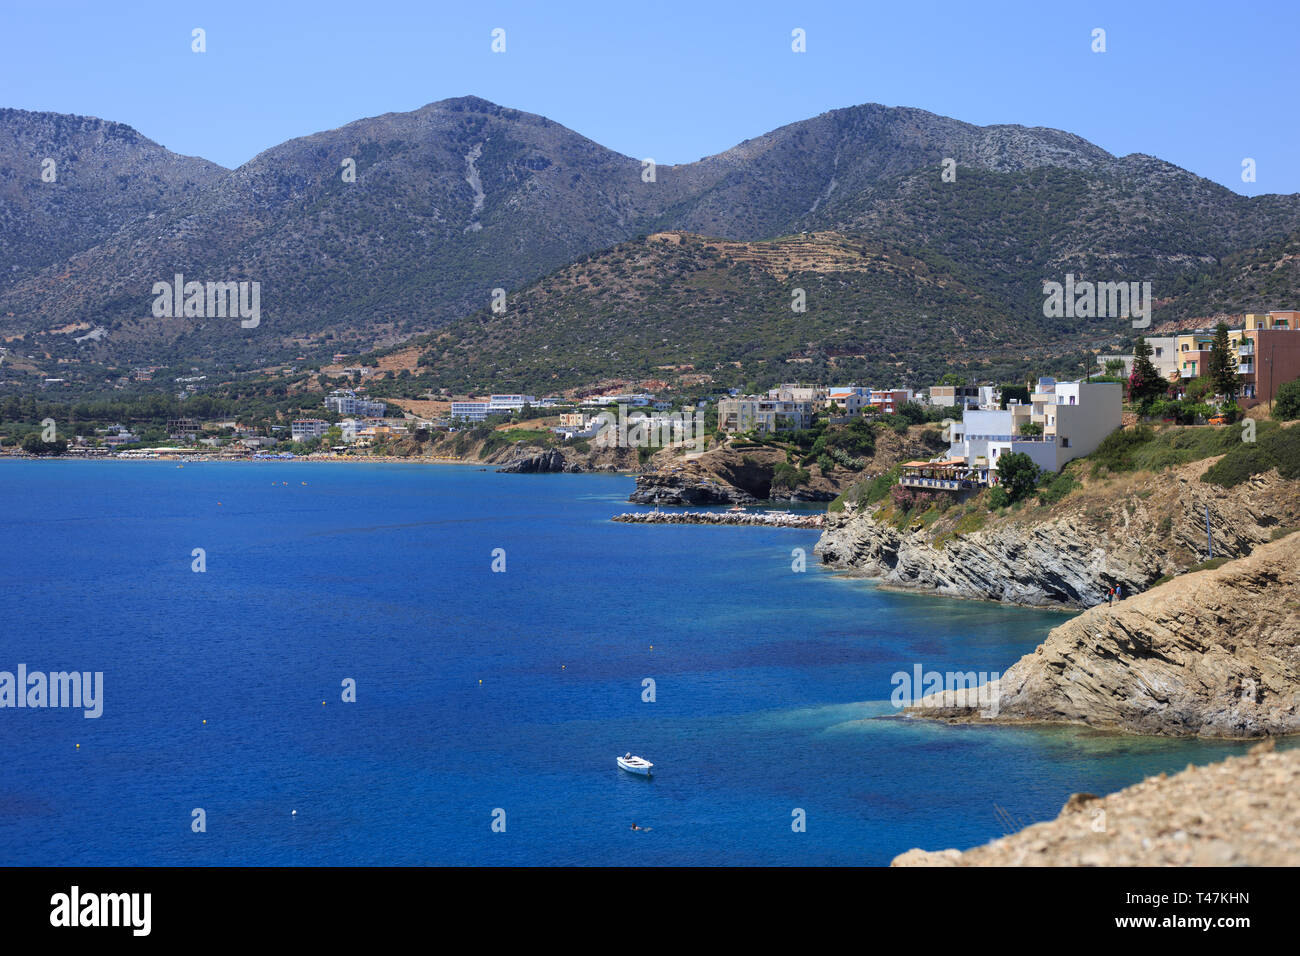 Sea Bay of resort village Bali. Views of mountain, shore, washed by waves and sun loungers. Bali, Rethymno, Crete, Greece Stock Photo